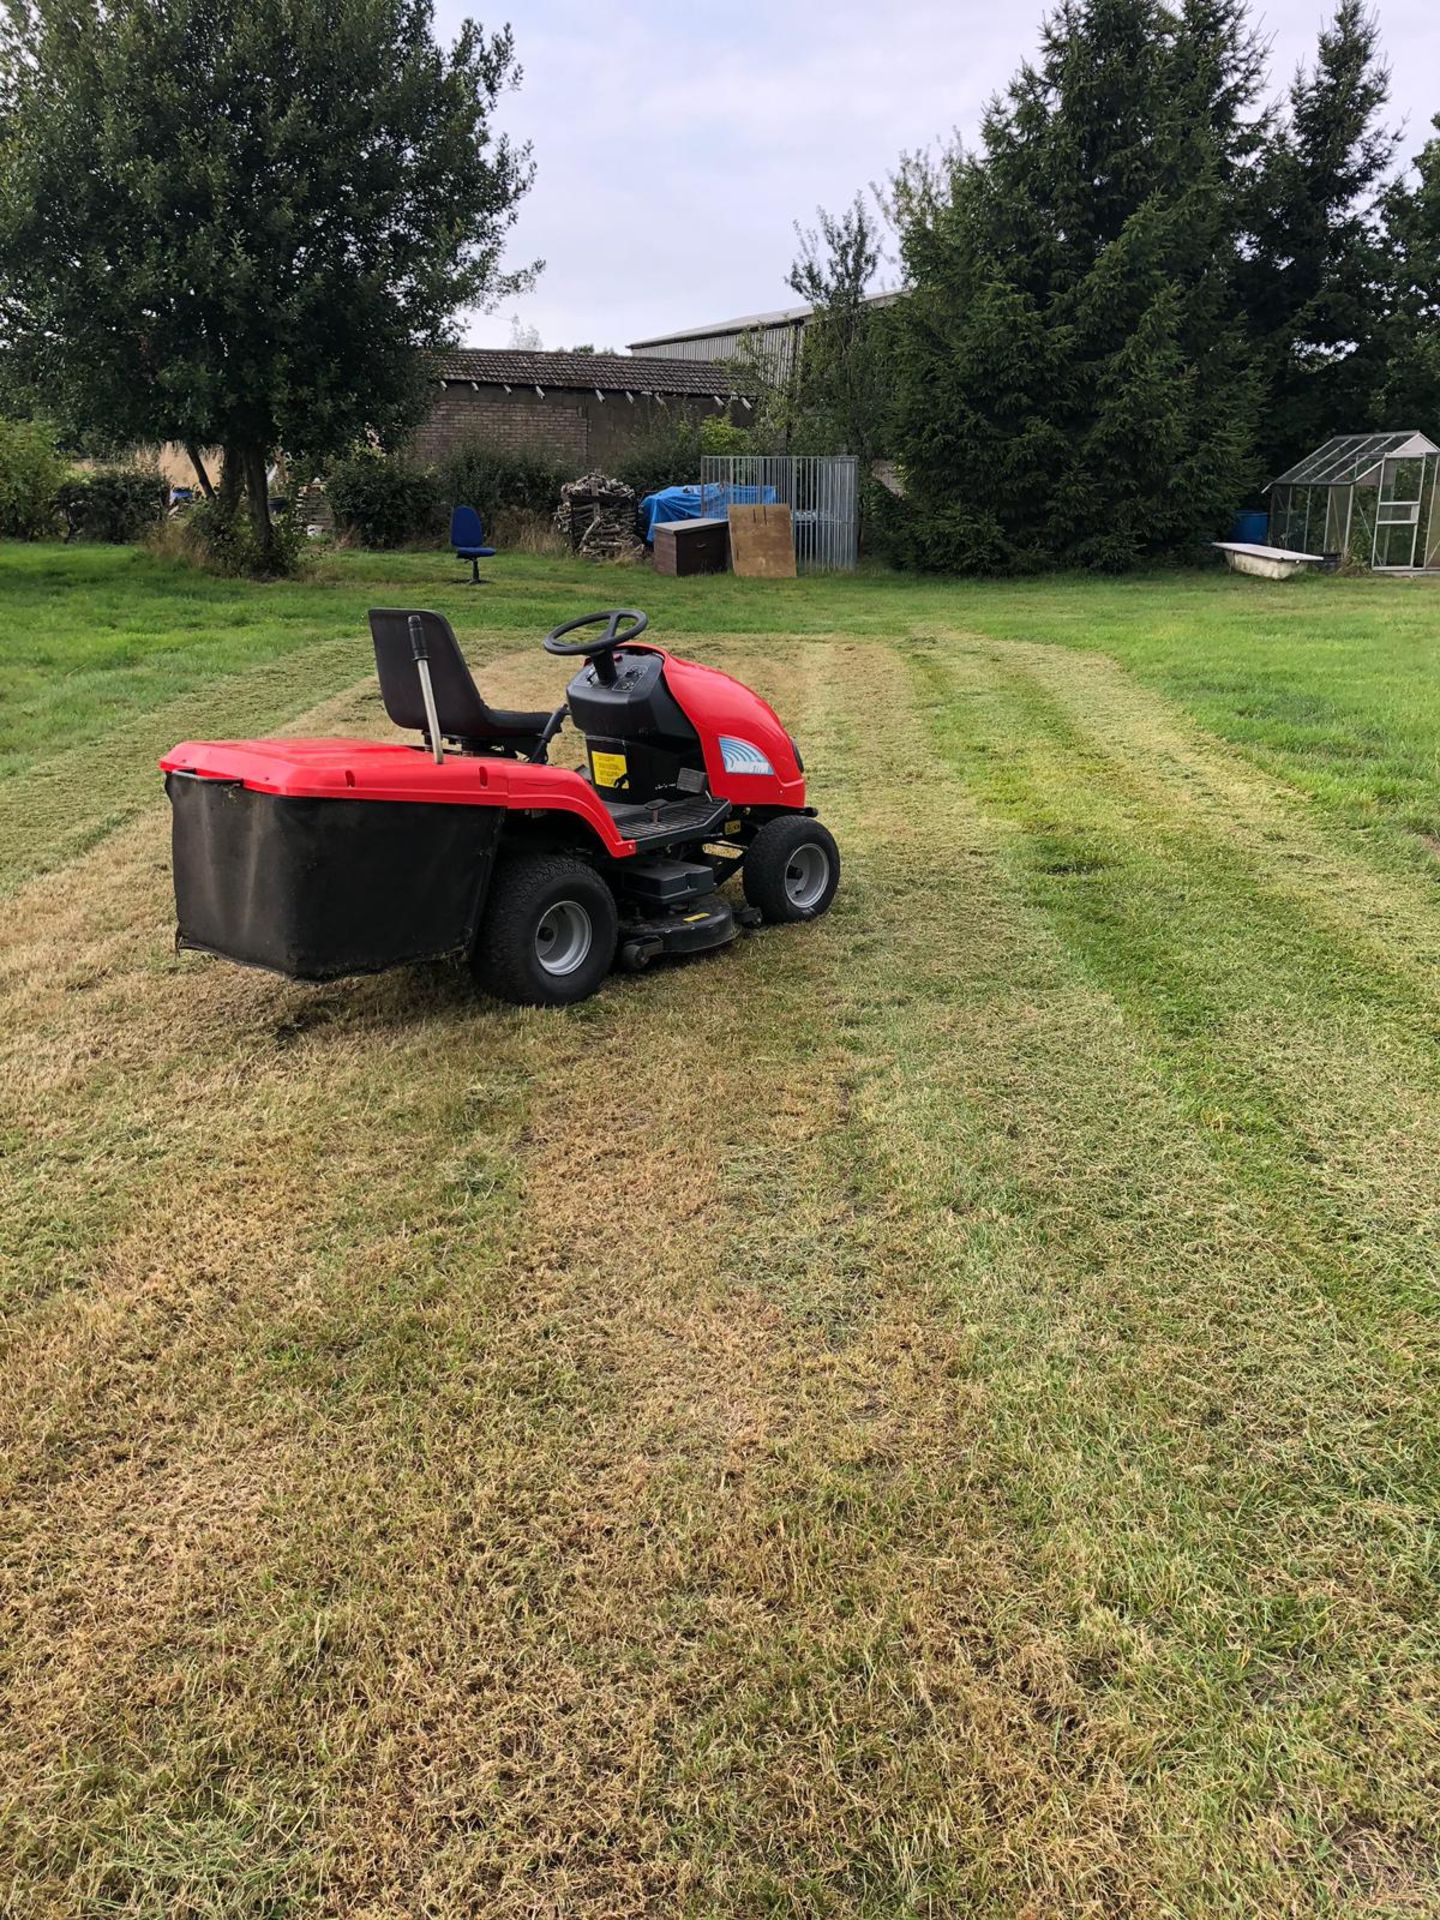 LAWNSTAR RIDE ON PETROL LAWN MOWER WITH REAR GRASS COLLECTOR, STARTS, RUNS AND CUTS *NO VAT* - Image 3 of 6